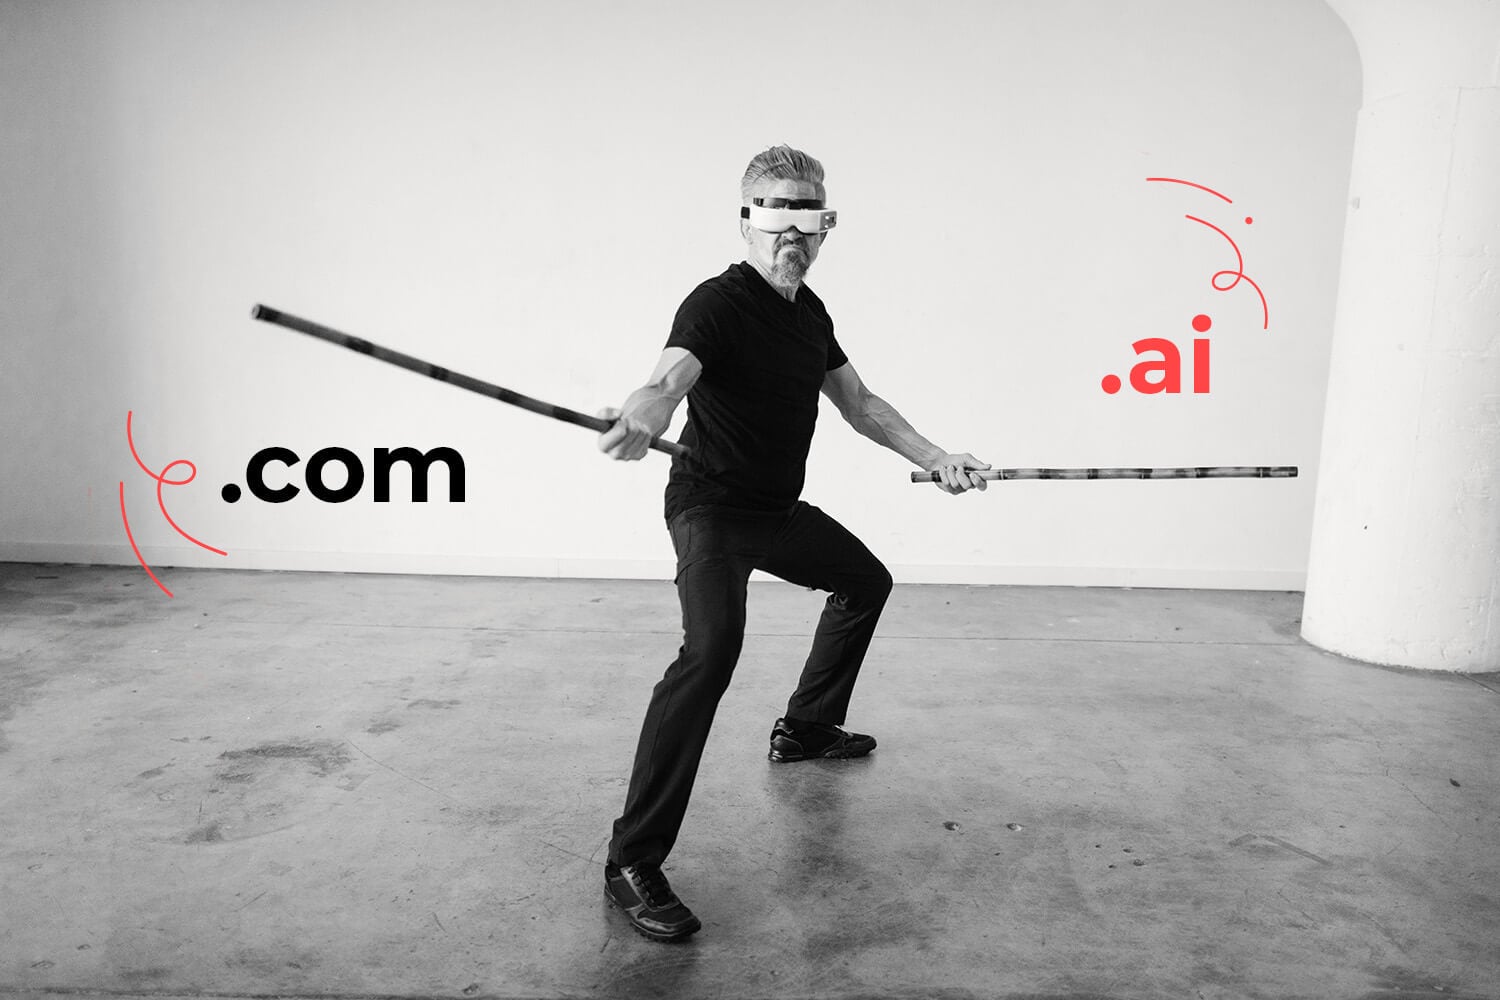 .com vs .ai: What Domain Name Is Best For You?